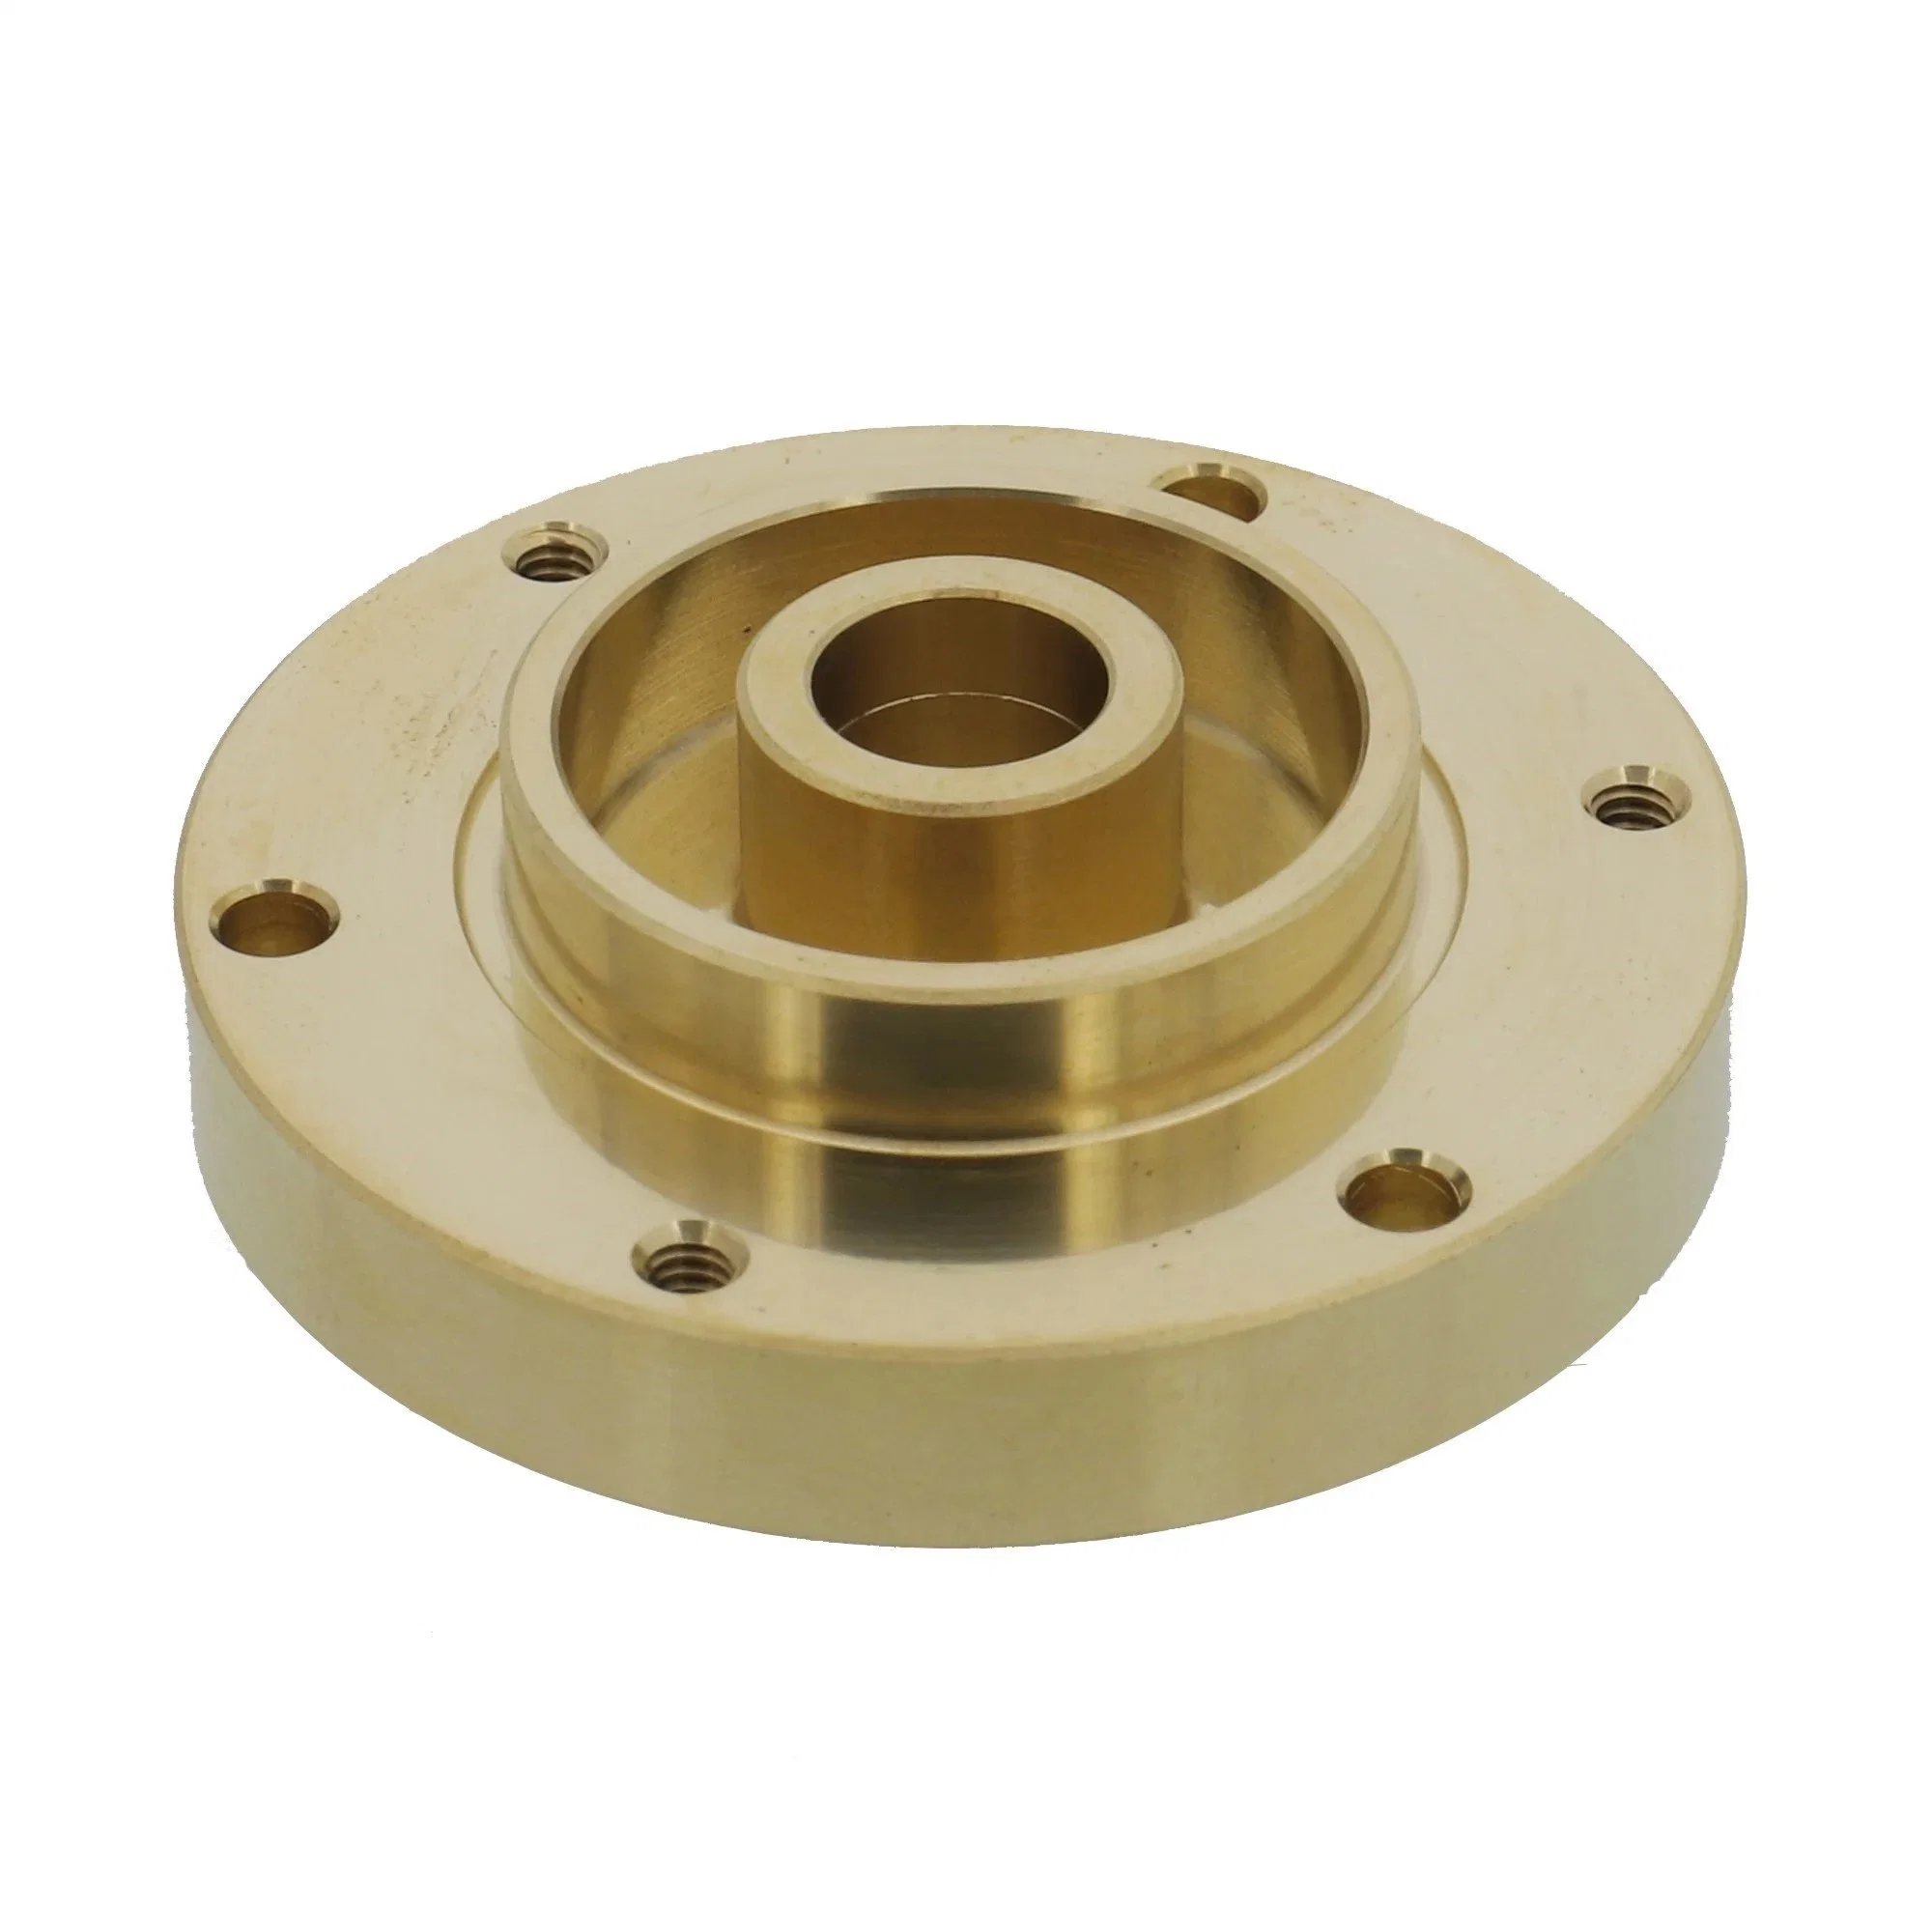 OEM Precision CNC Machinery Parts of Flanges